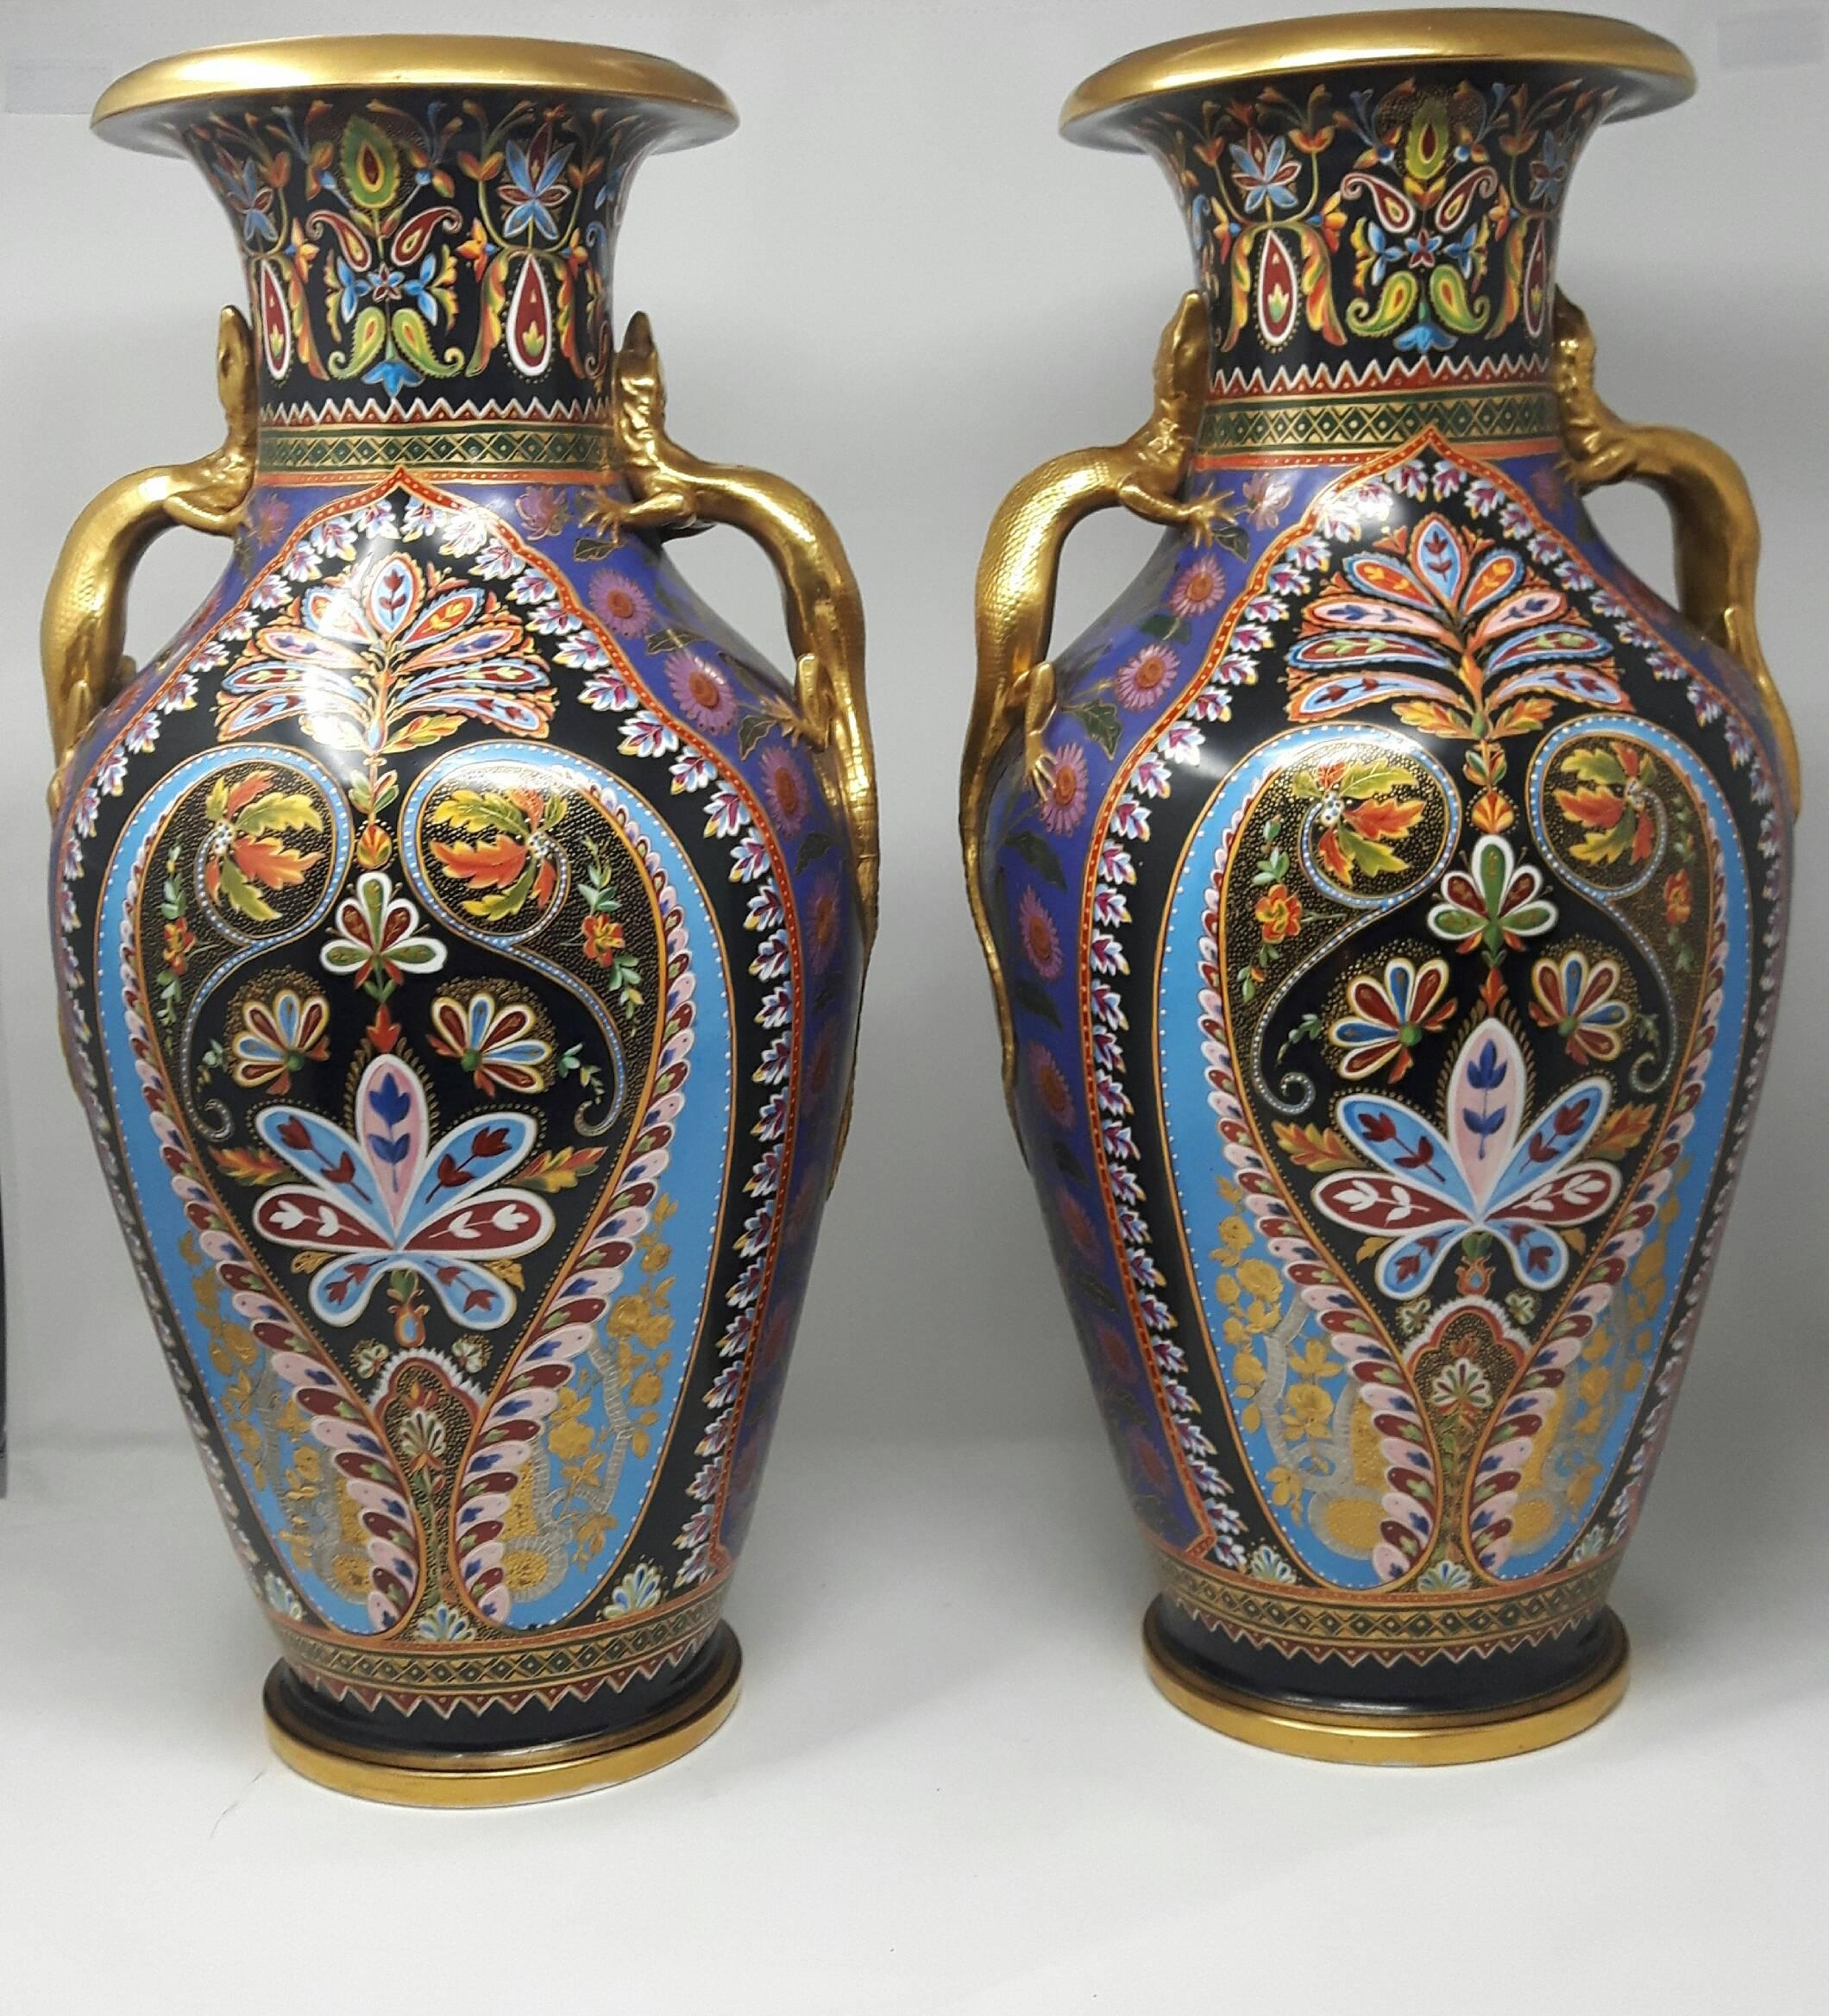 Of generous baluster shape with modelled and brightly gilded salamander handles, richly enamelled in the Cashmir style with multi-colored panels including leaf motifs in autumnal colors and raised gold on turquoise, pink and black grounds, the sides